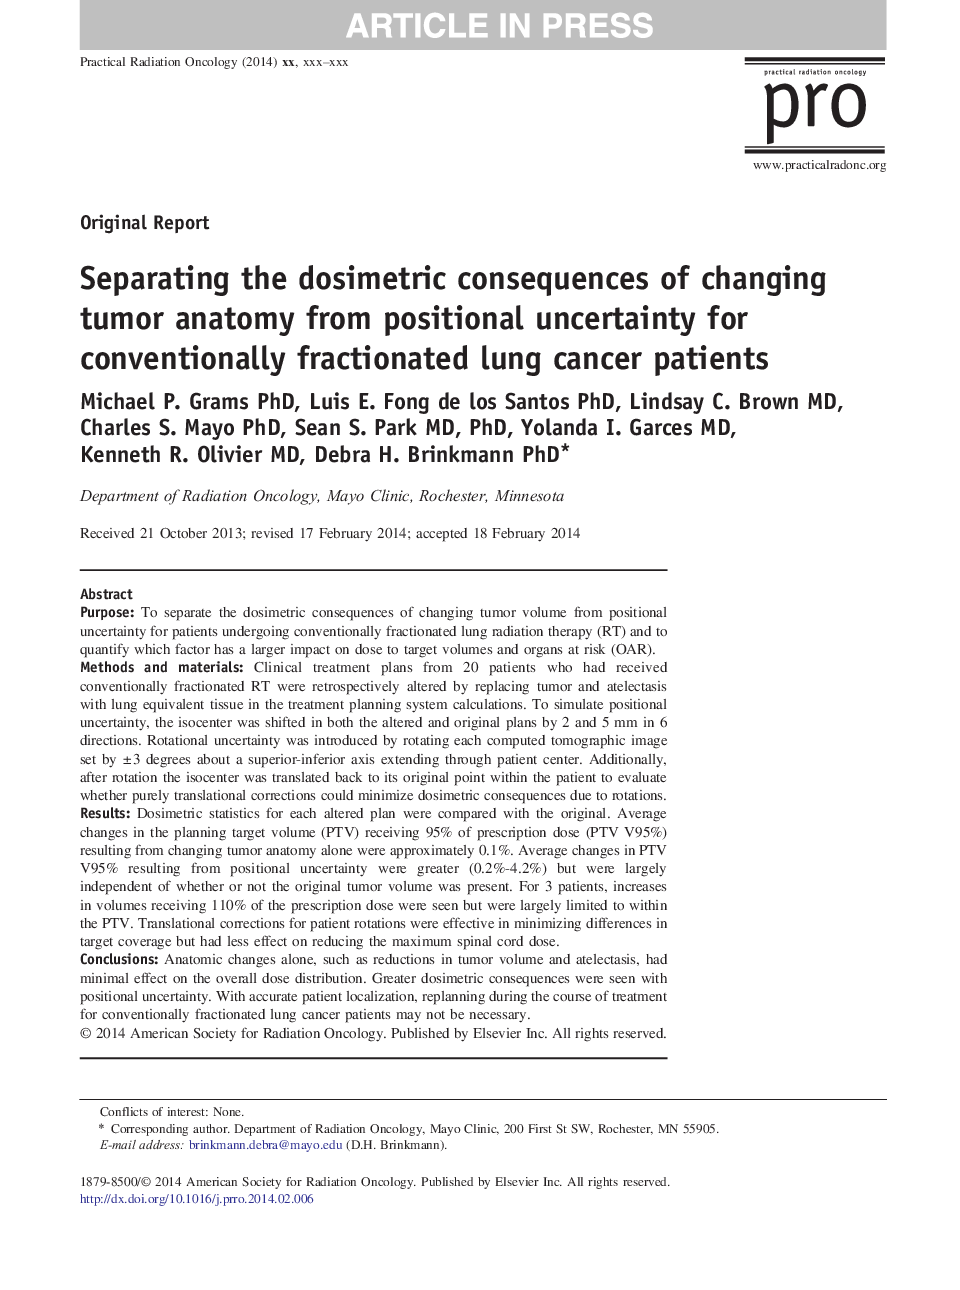 Separating the dosimetric consequences of changing tumor anatomy from positional uncertainty for conventionally fractionated lung cancer patients